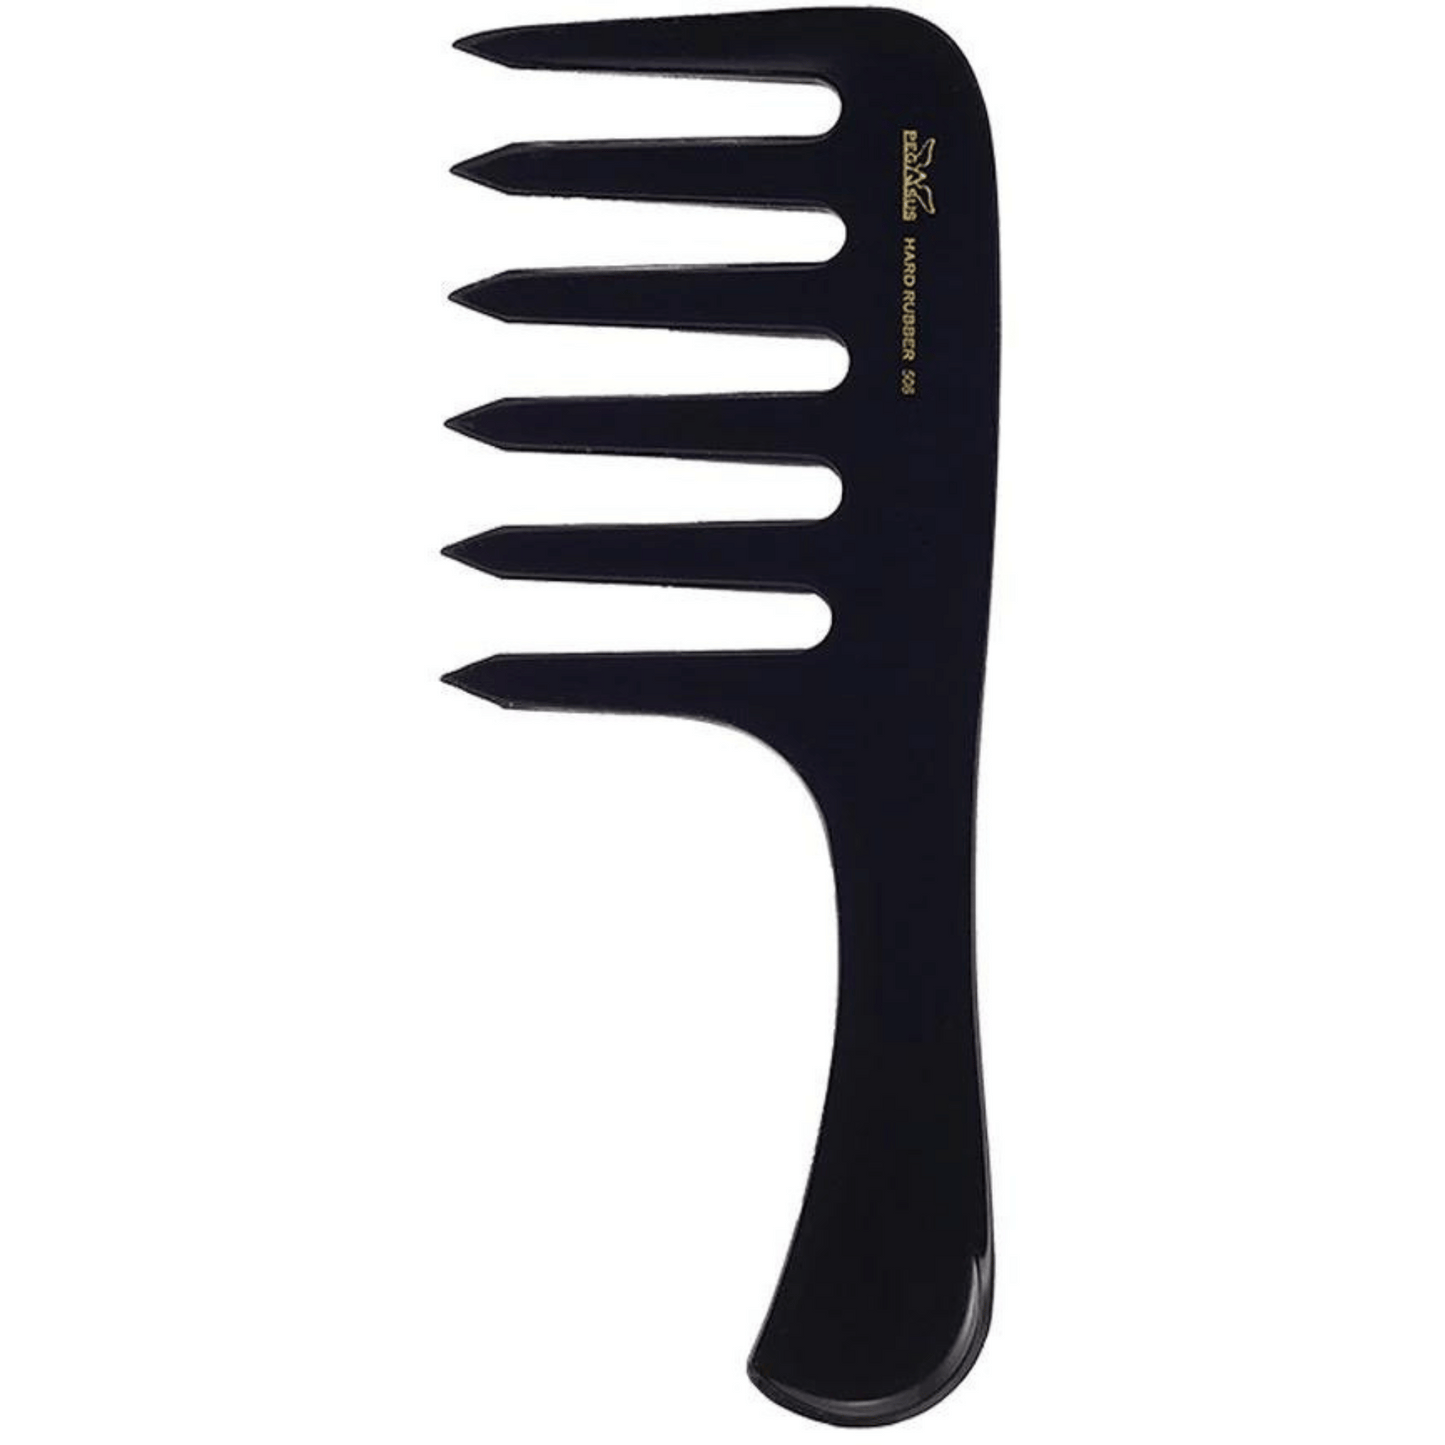 Primary Image of Wide Tooth 6.5 Inch Hard Rubber Comb